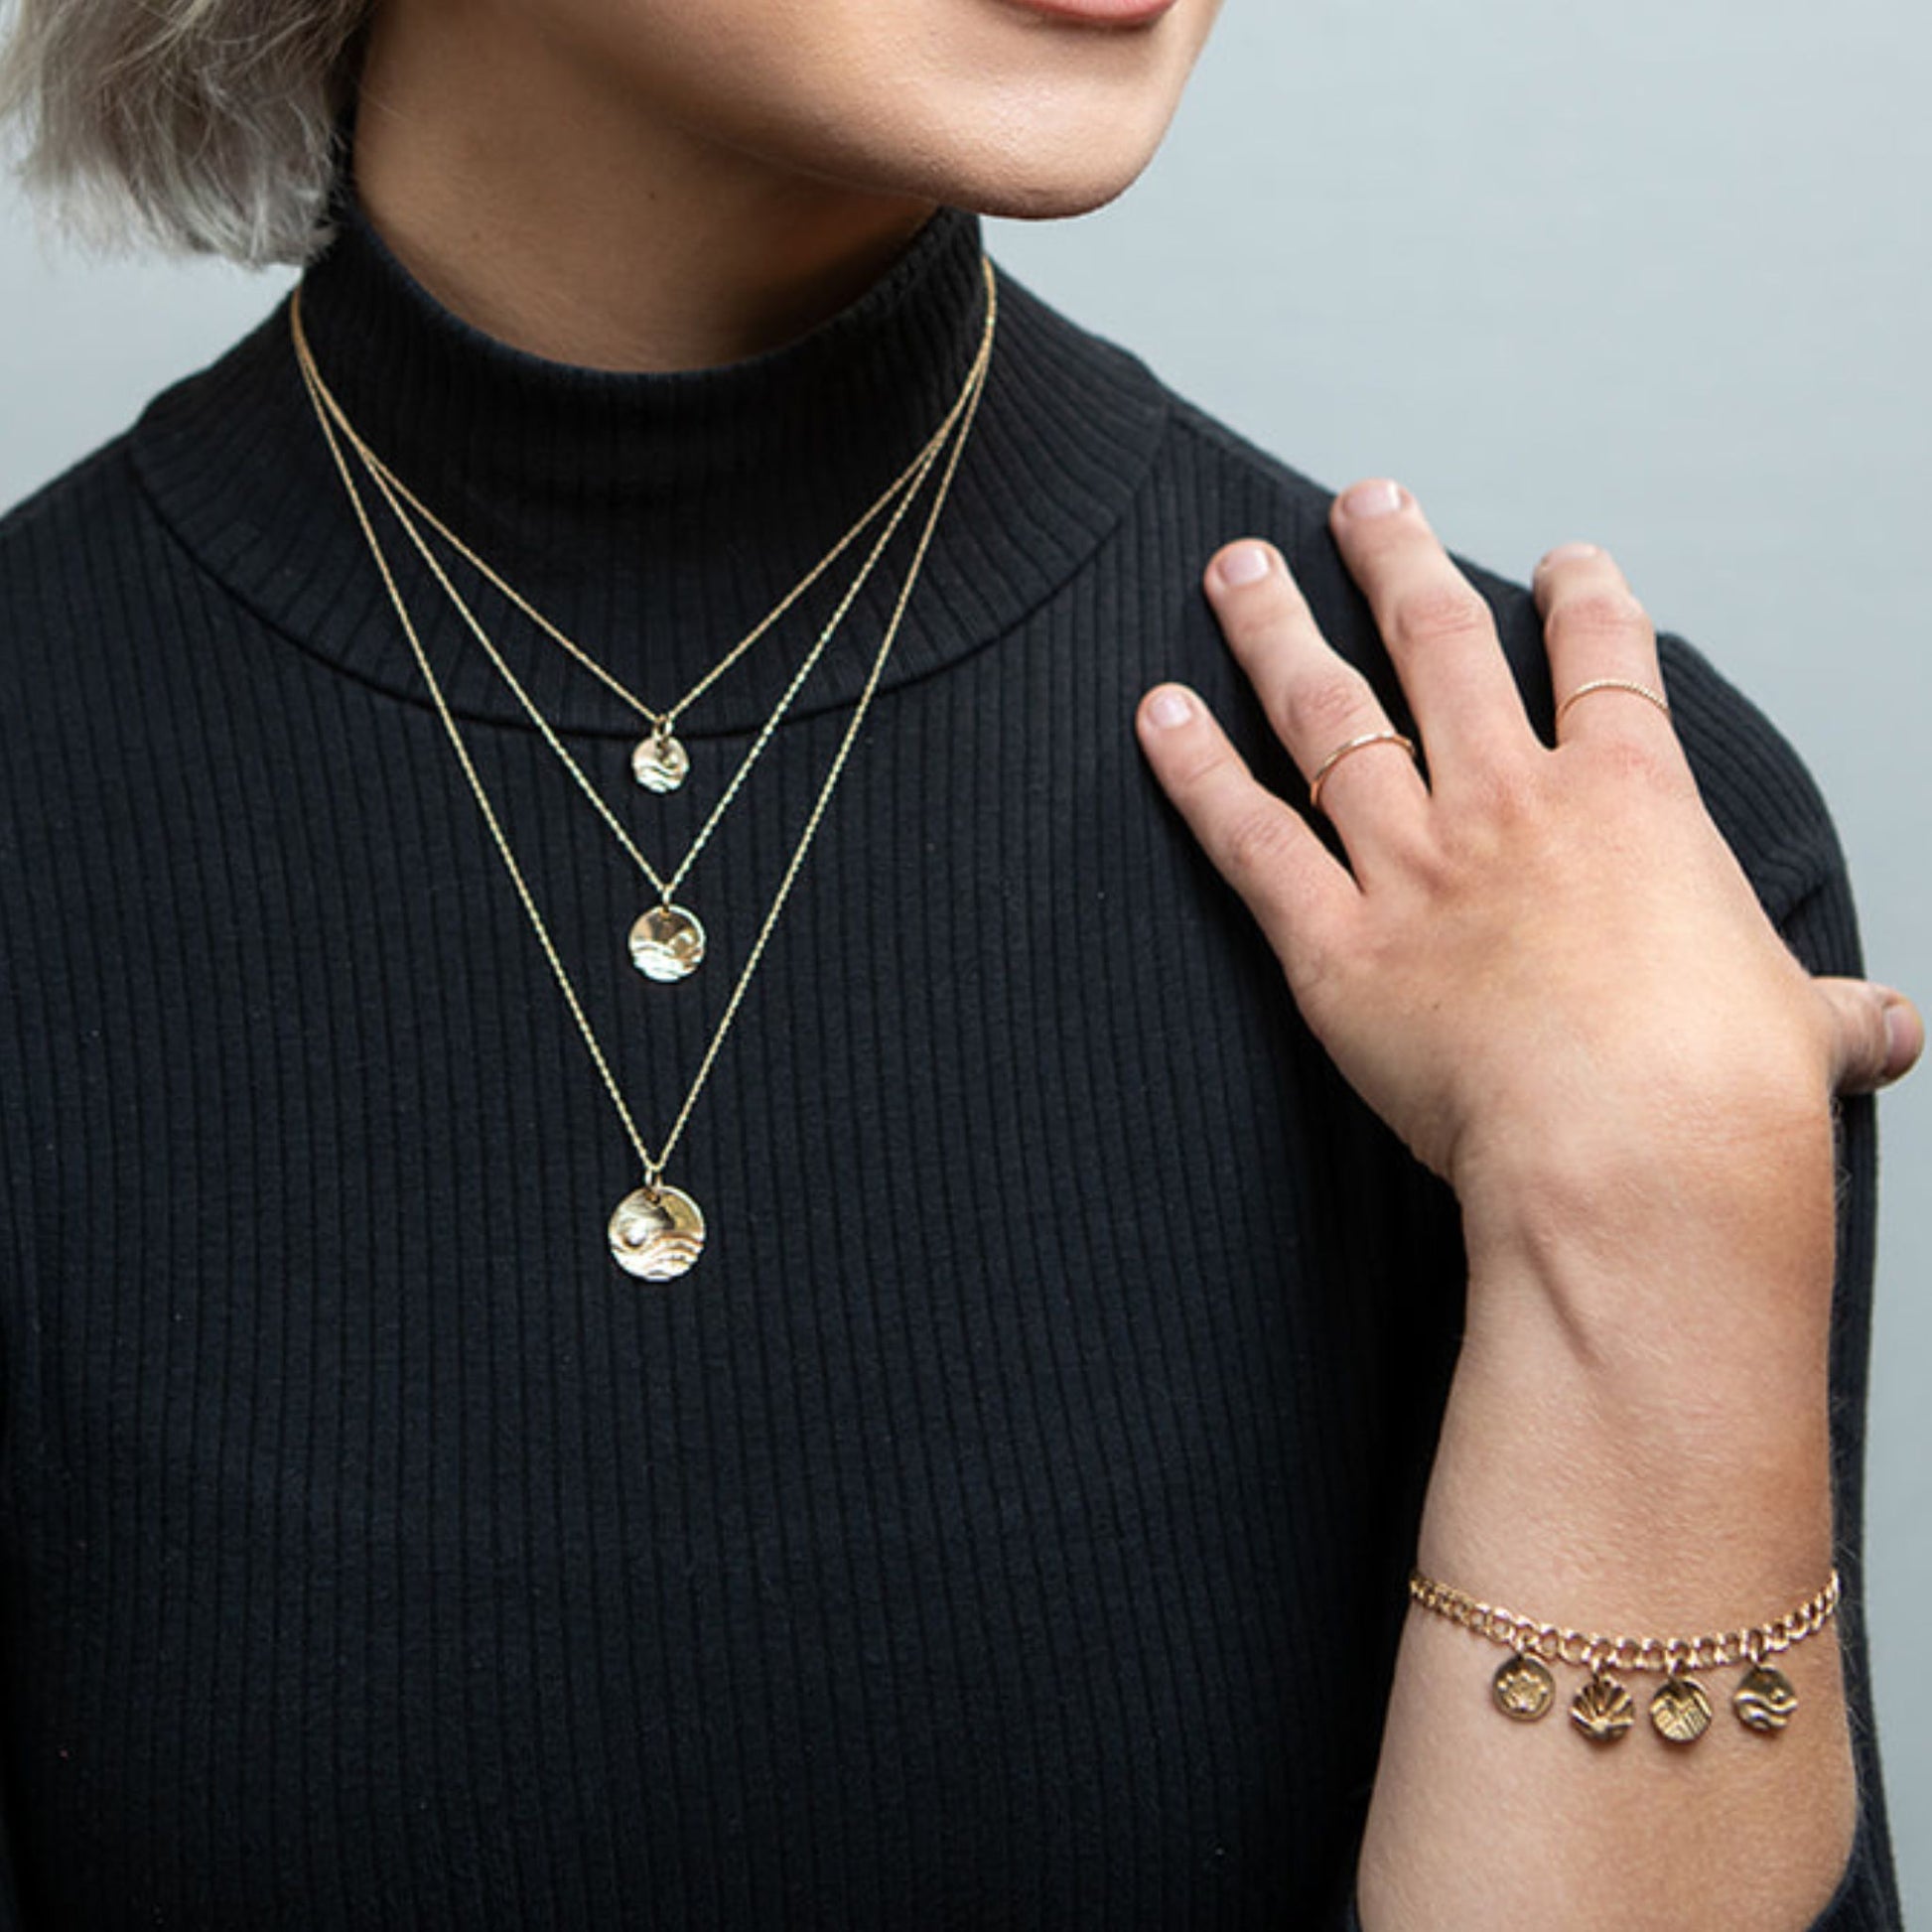 Model wearing gold reflections charm